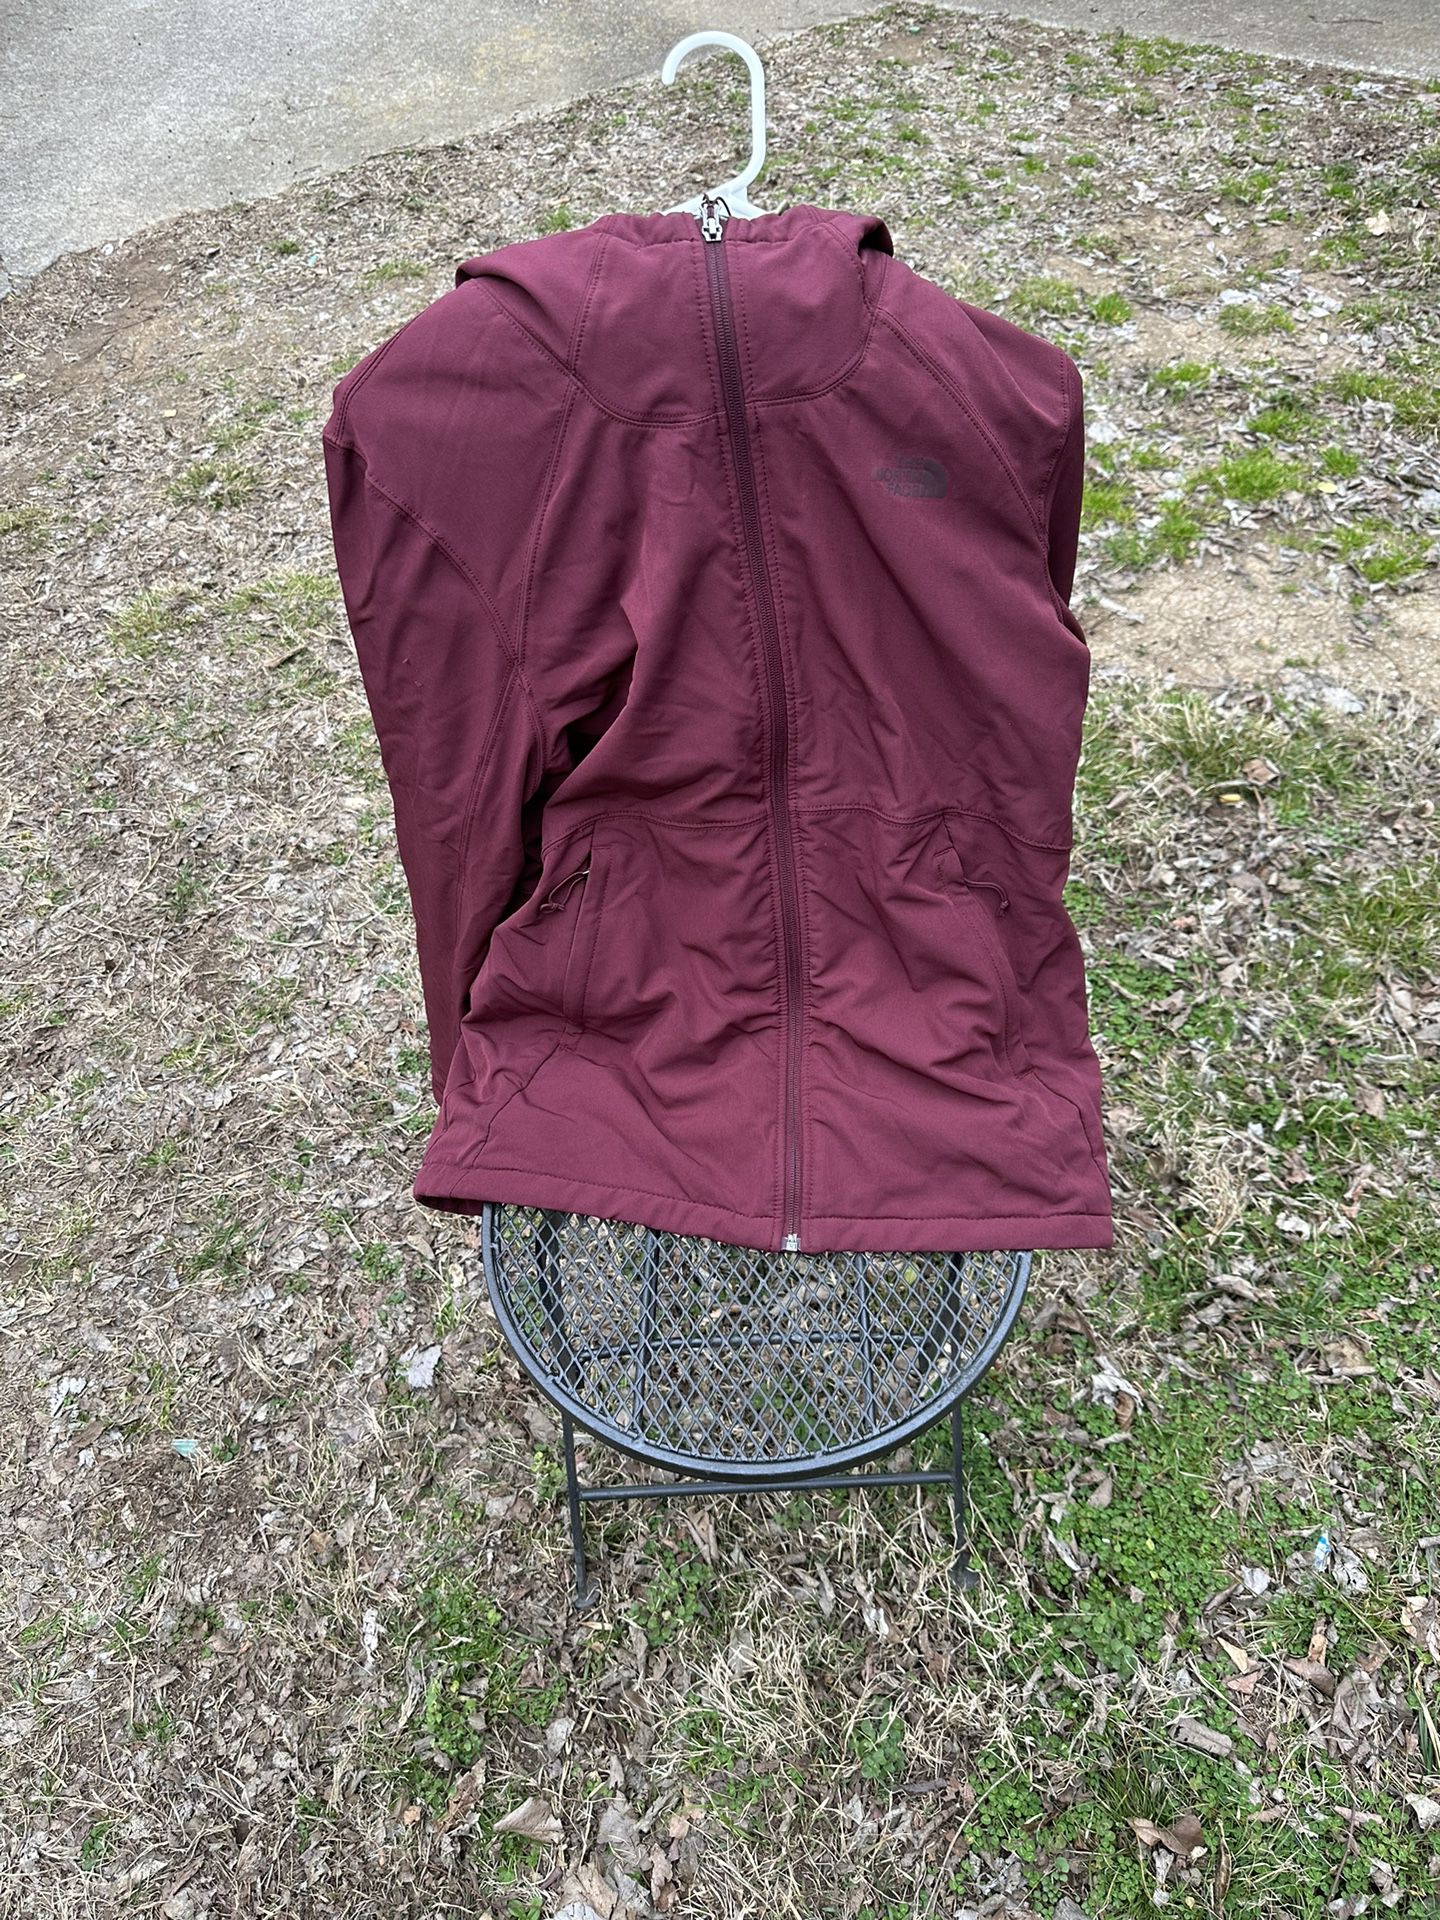 The North Face Jacket Womens XL Maroon Burgundy Hooded